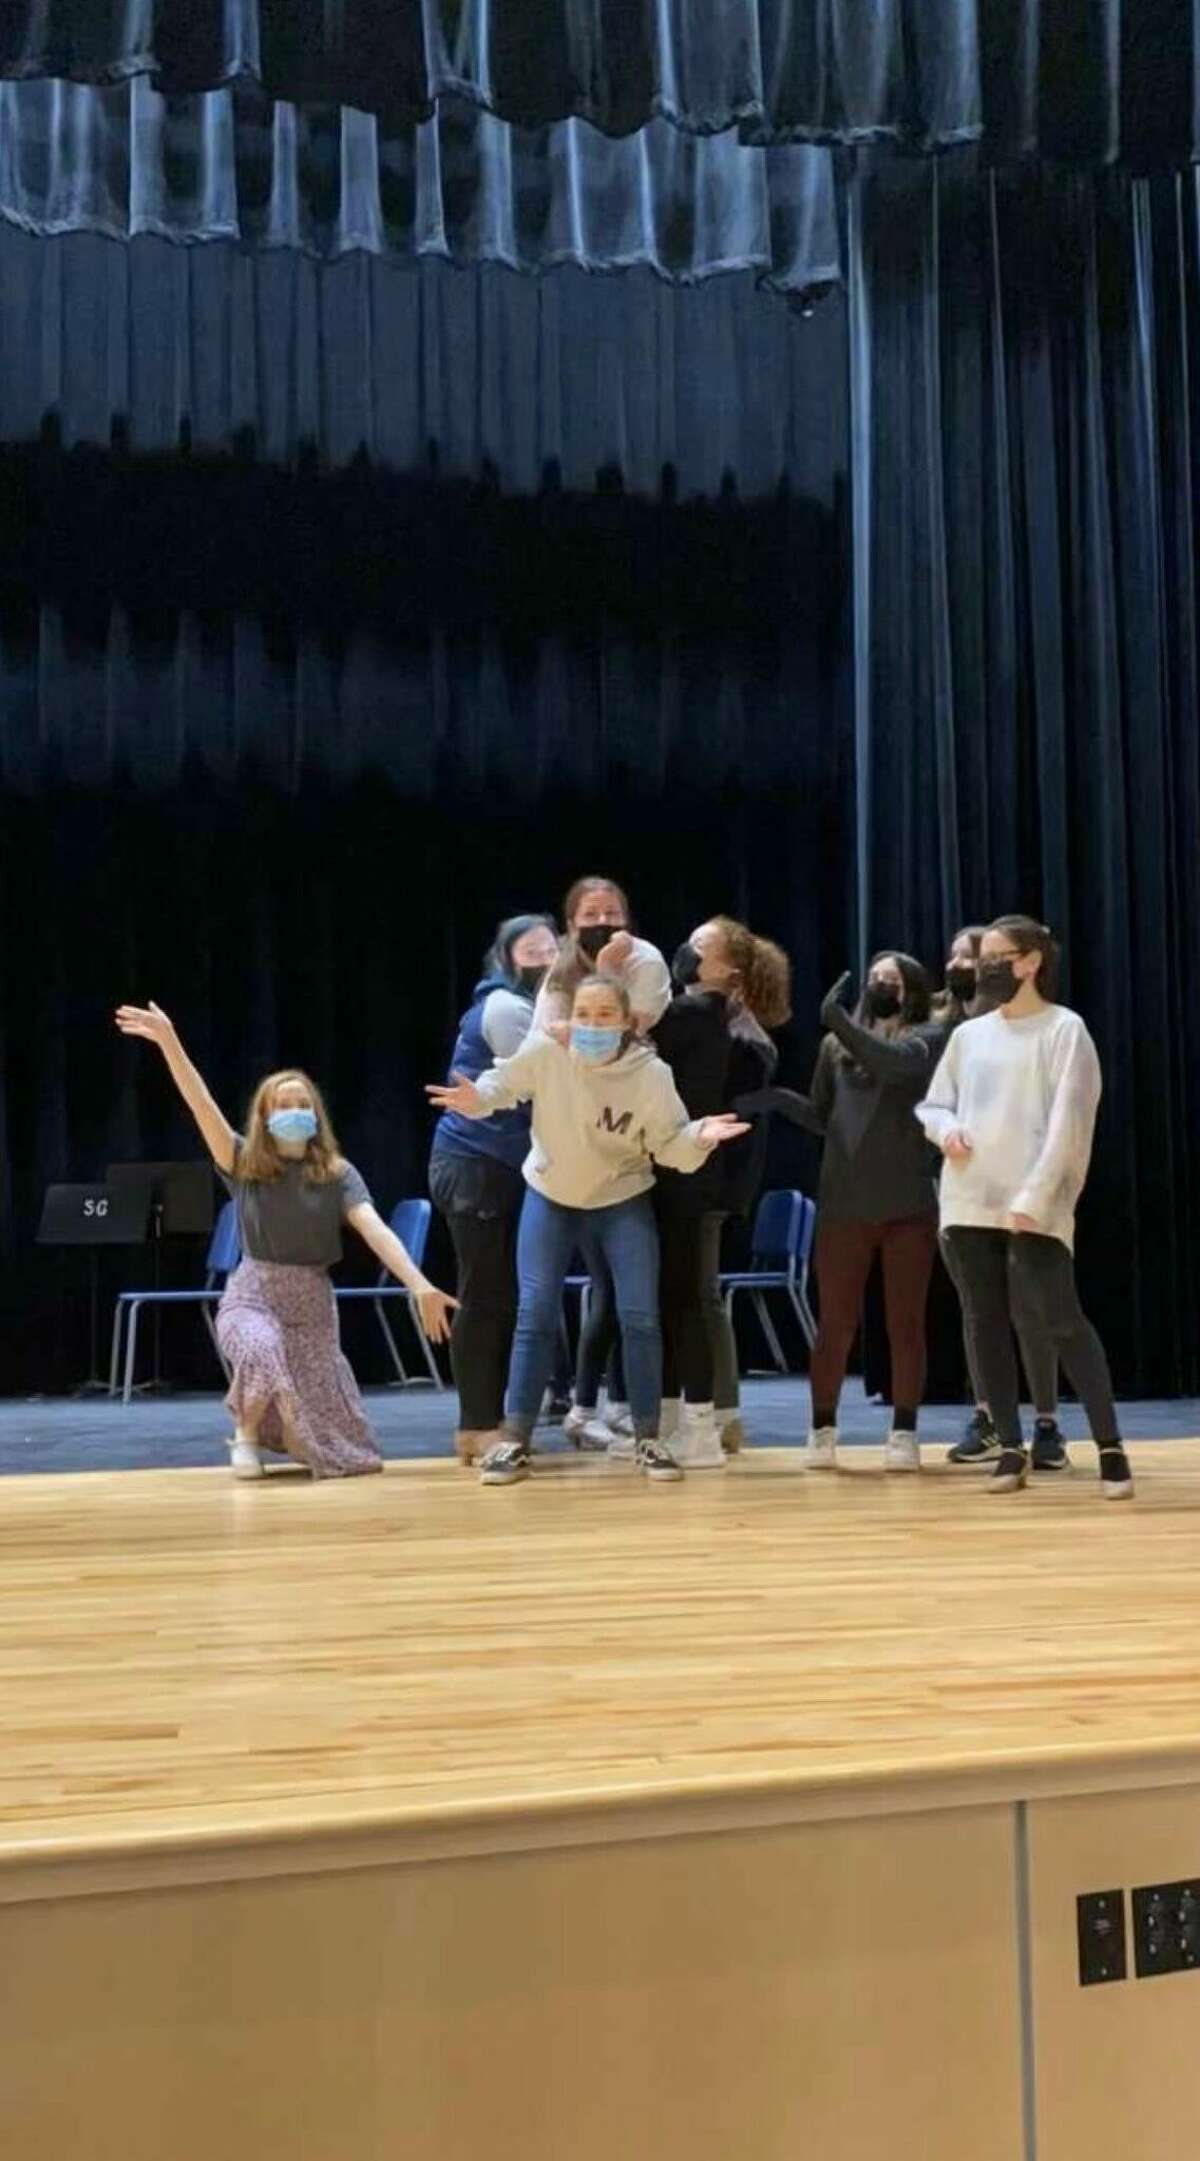 Scotia-Glenville Senior High School will perform "Rodgers and Hammerstein's Cinderella: Broadway version" on 7:30 p.m. April 1-2, 2 p.m. April 2.